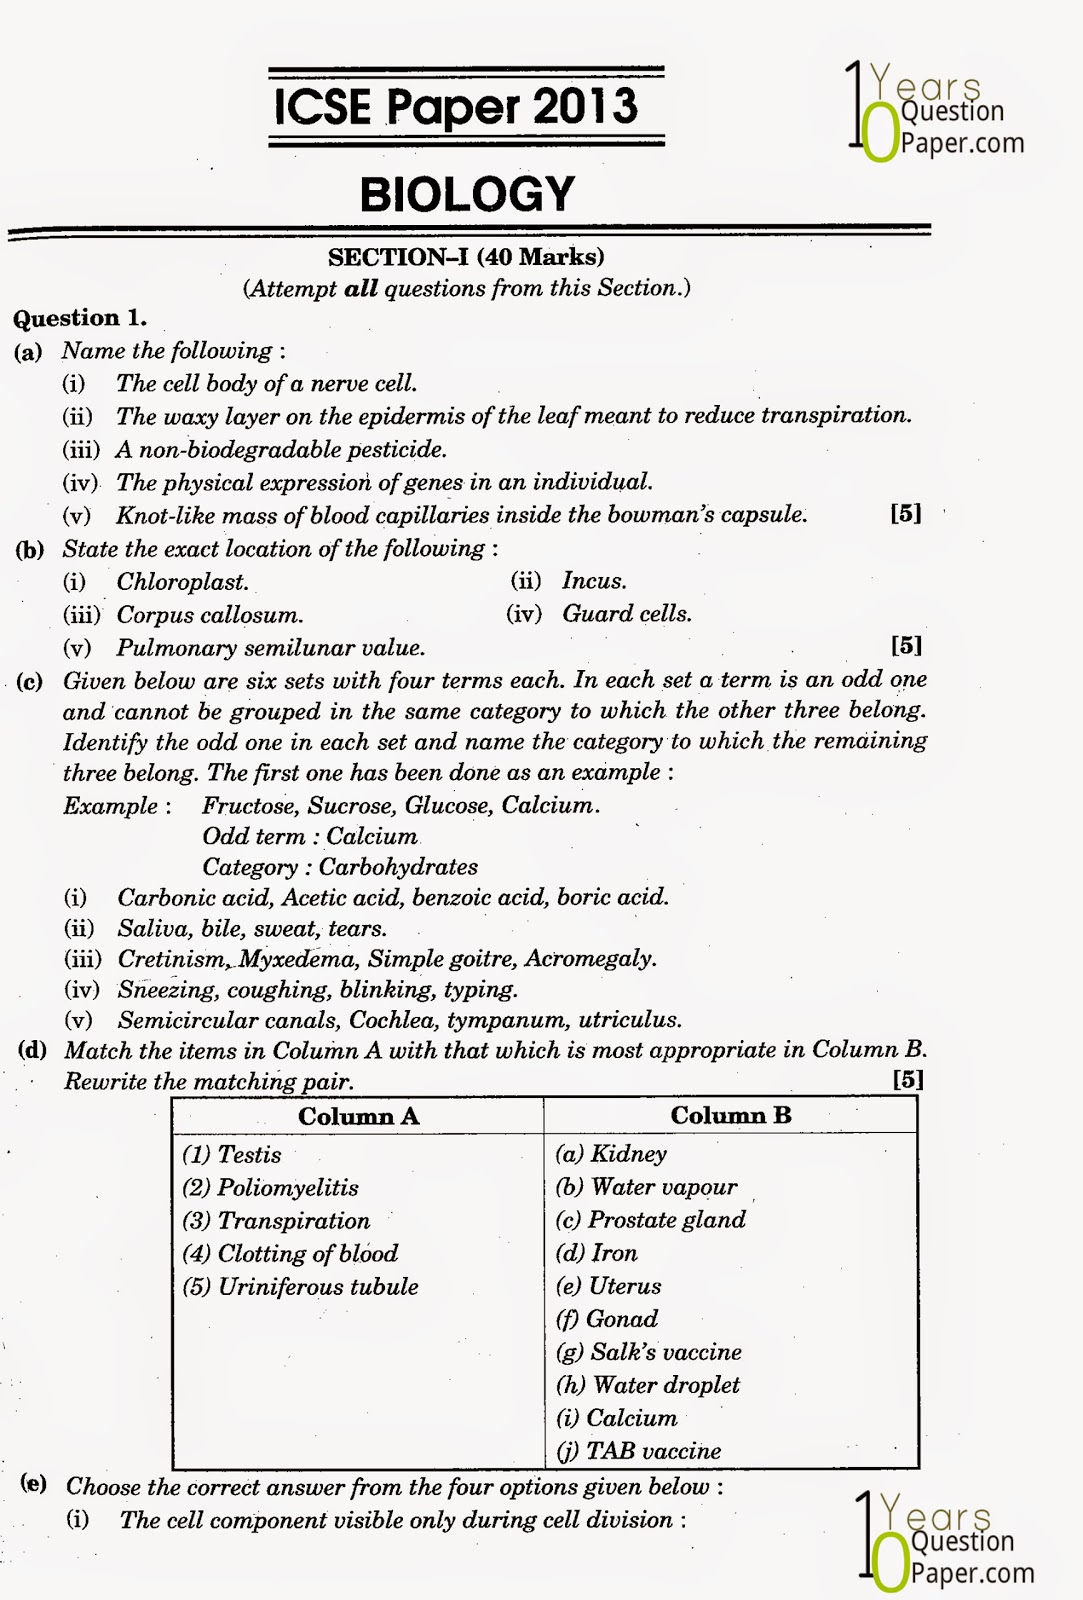 Free secondary school exam papers download